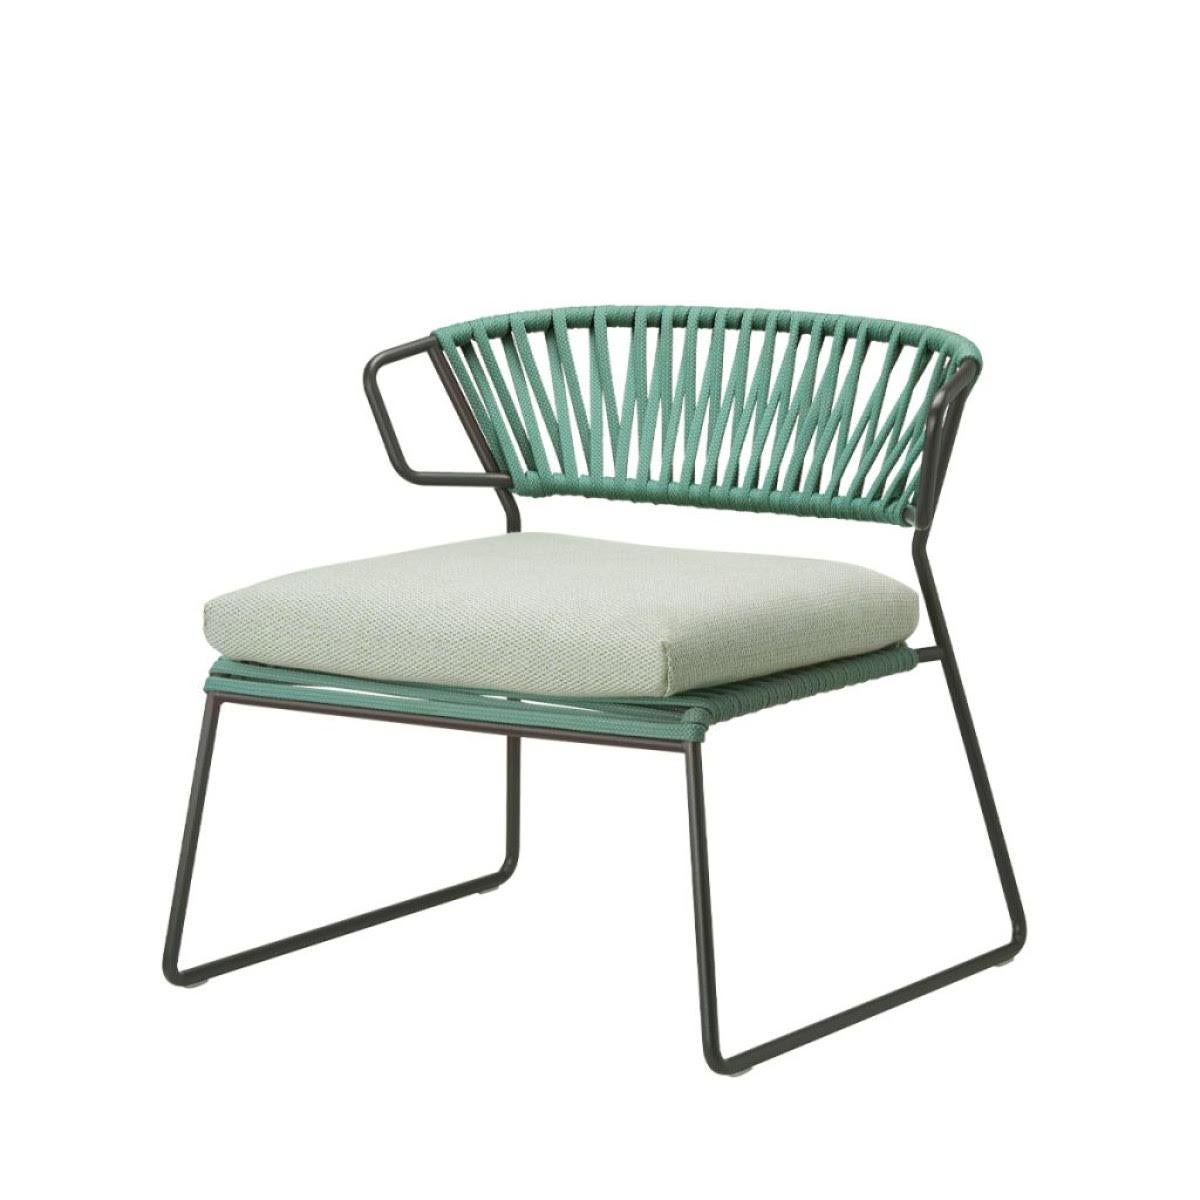 Modern Green Outdoor or Indoor Armchair in Metal and Ropes, 21 century For Sale 1